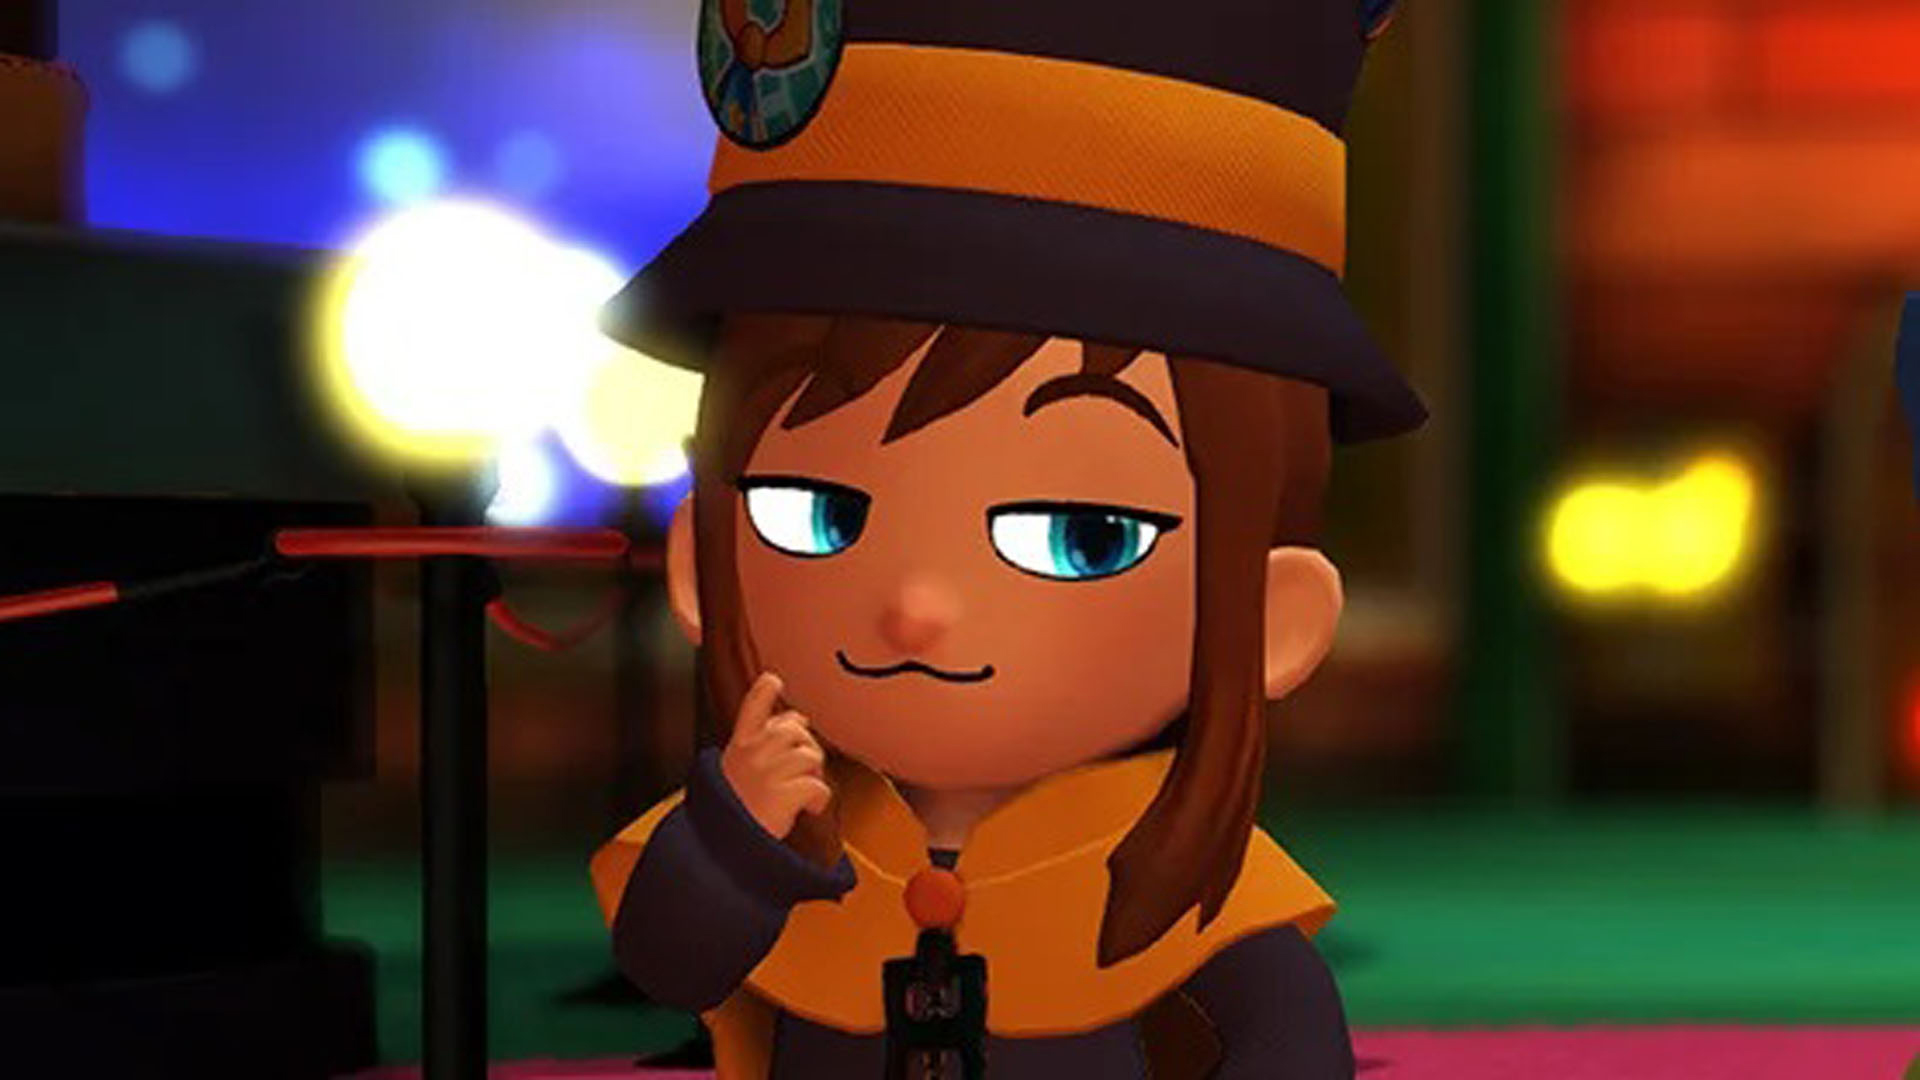 A Hat in Time! 